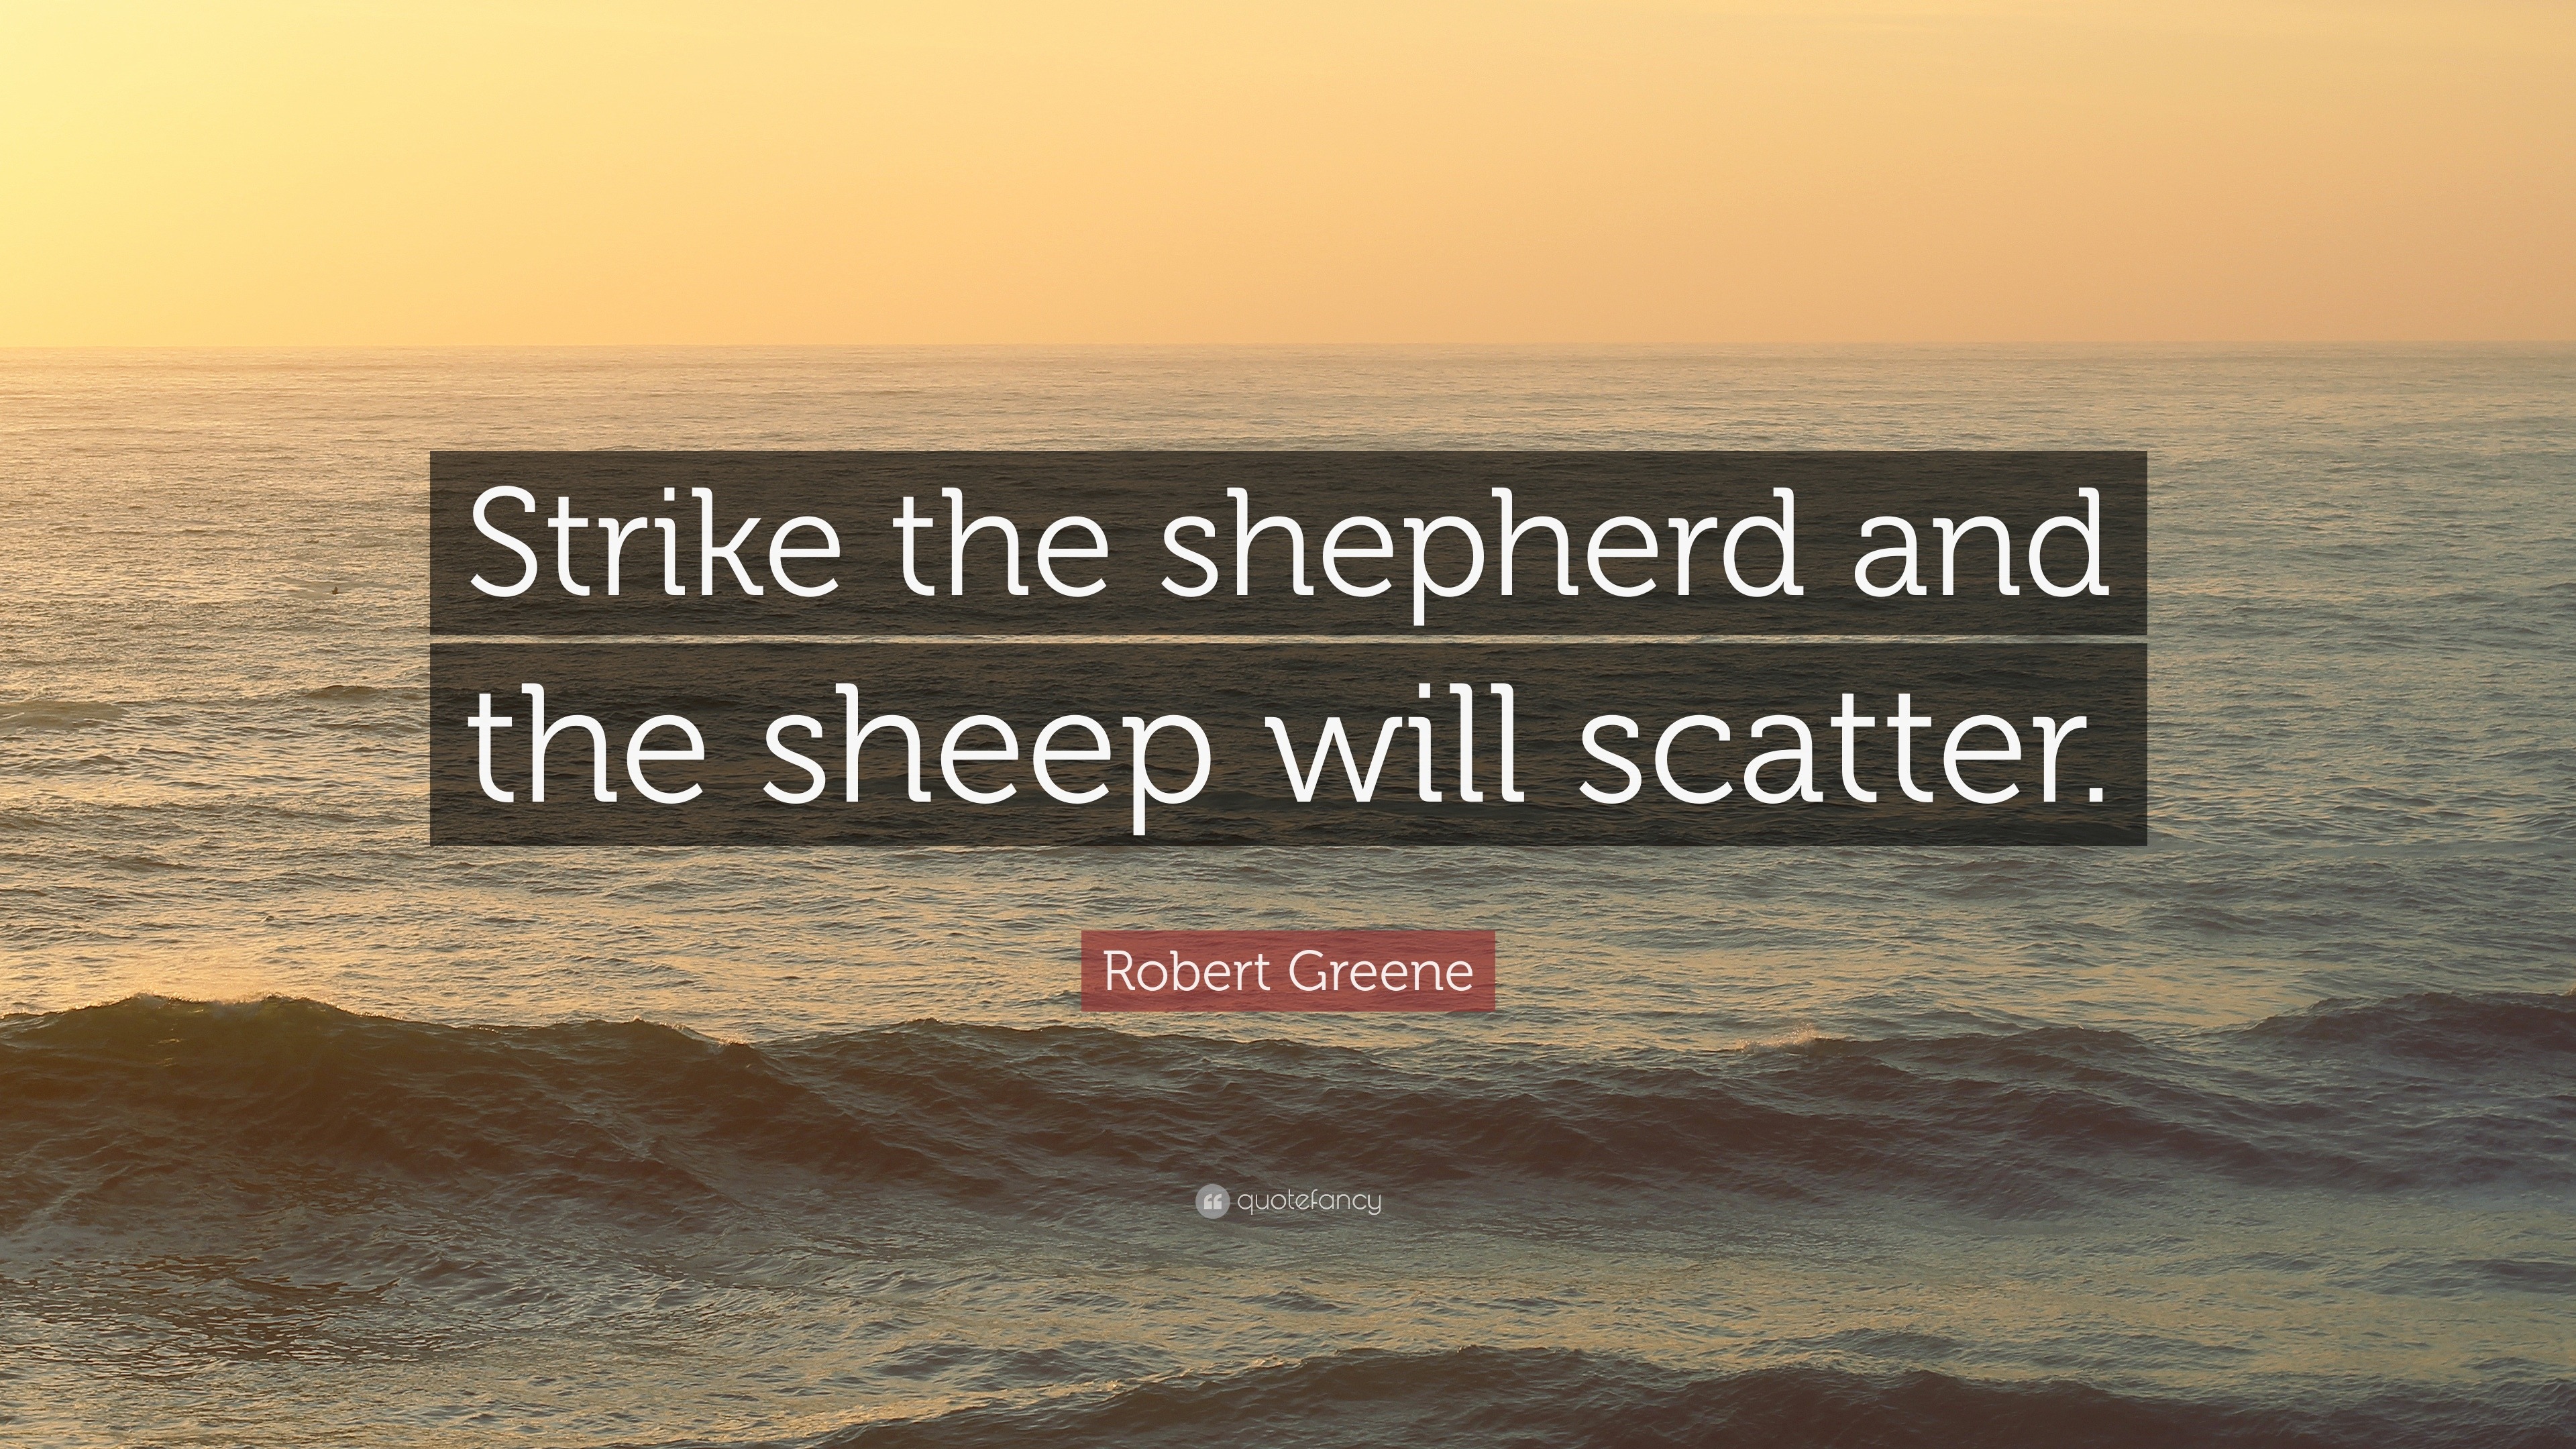 strike the shepherd and the sheep will scatter